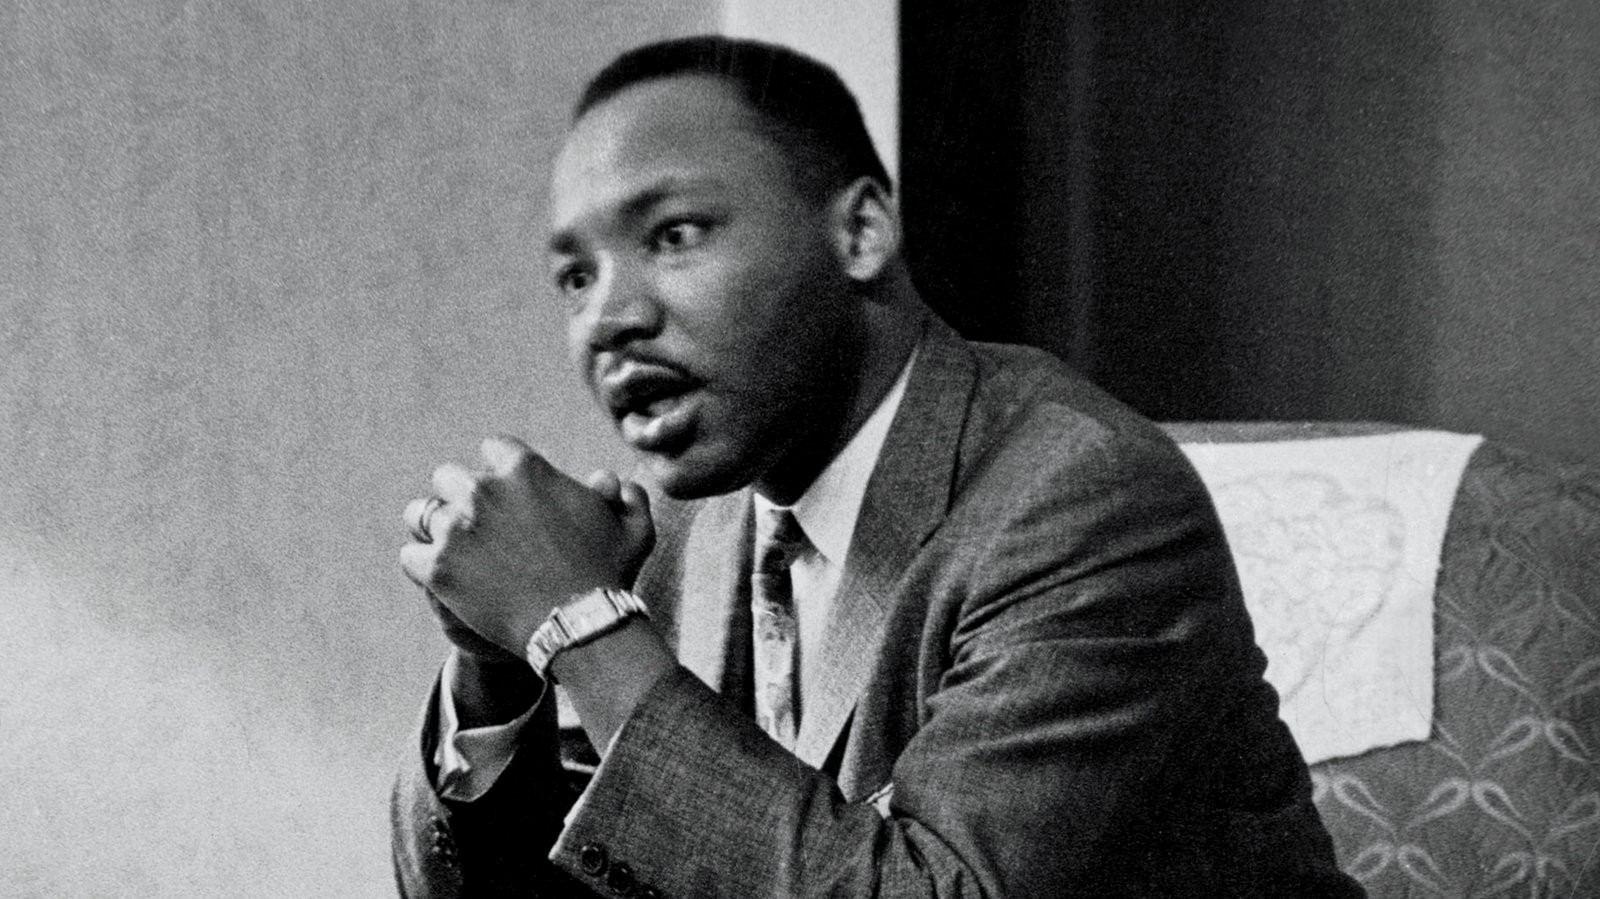 A black and white photo of Dr. Martin Luther King Jr. He is seated with his hands clasped in front of him, talking to someone to the left of the frame.